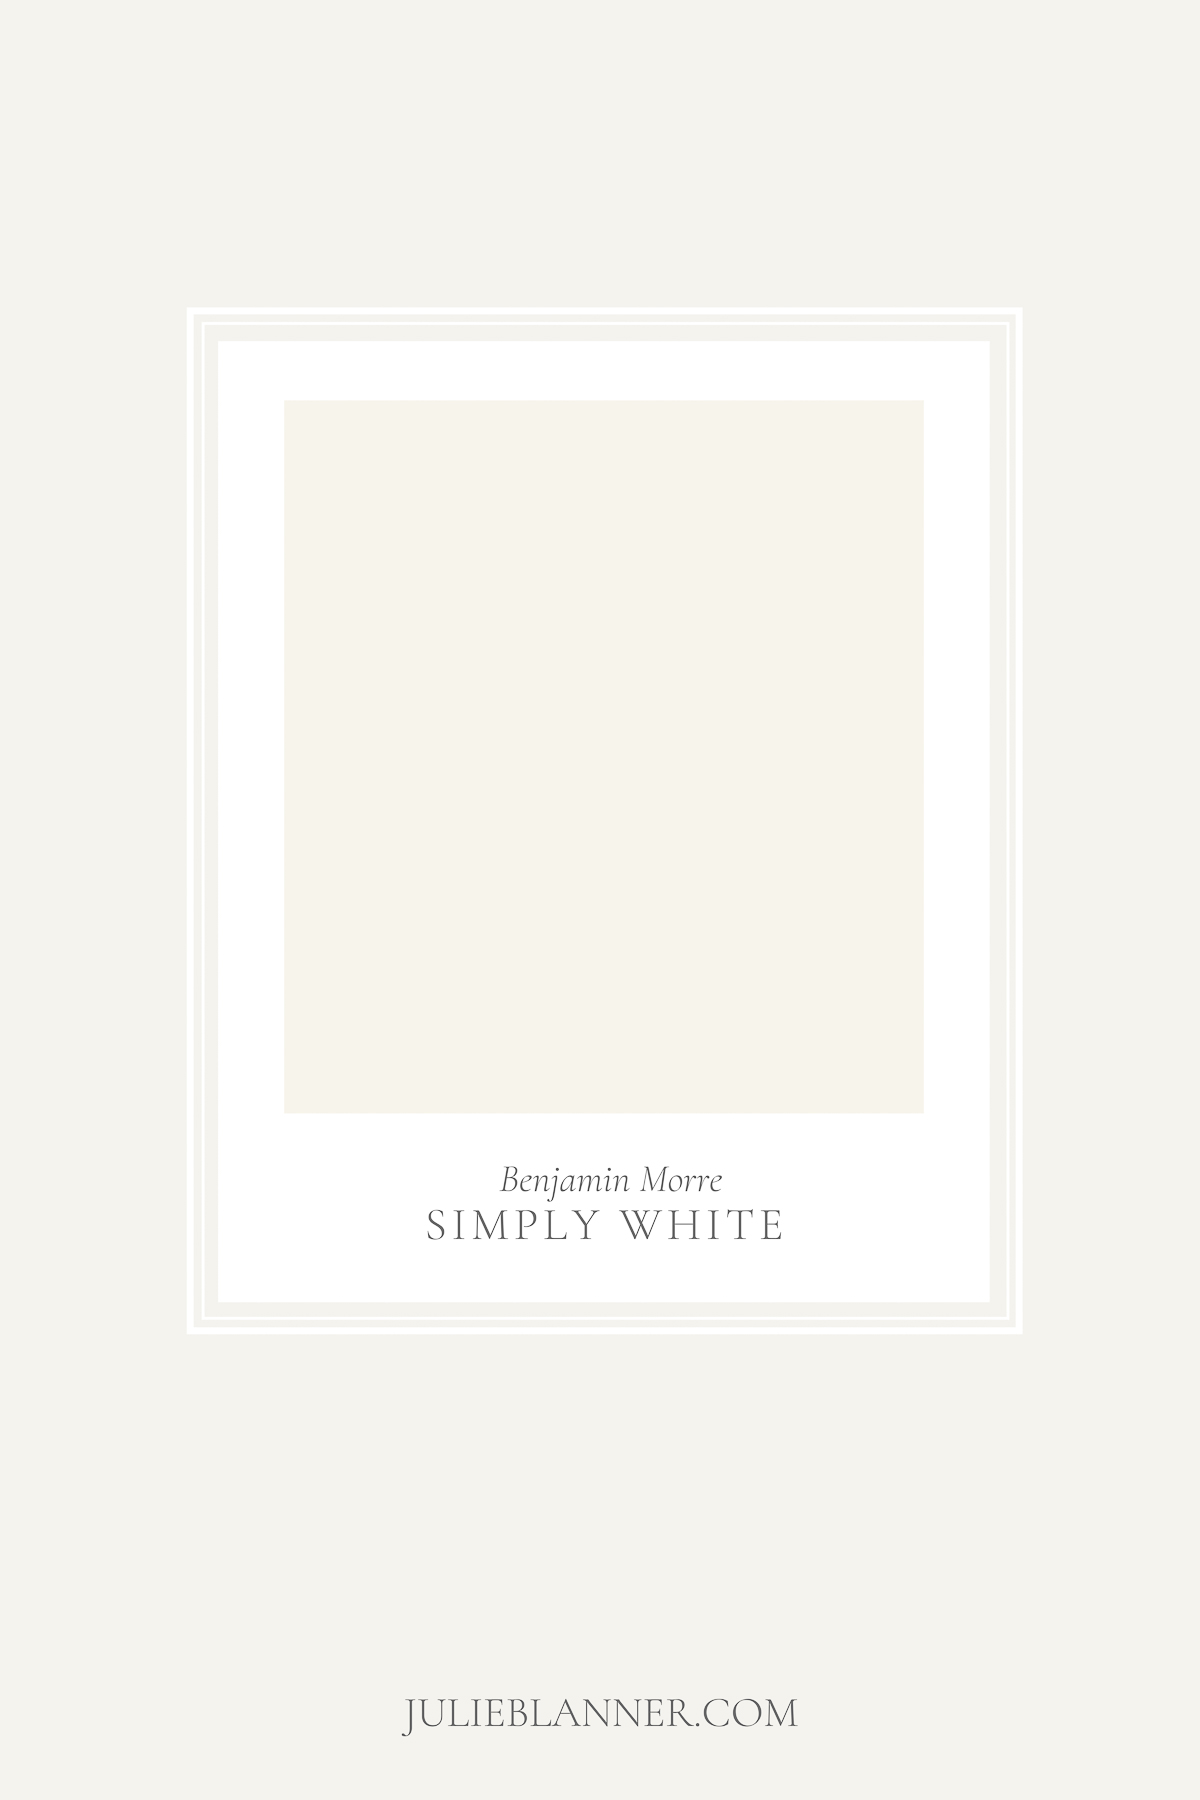 A graphic featuring a paint card for Benjamin Moore Simply White, a deck paint color.